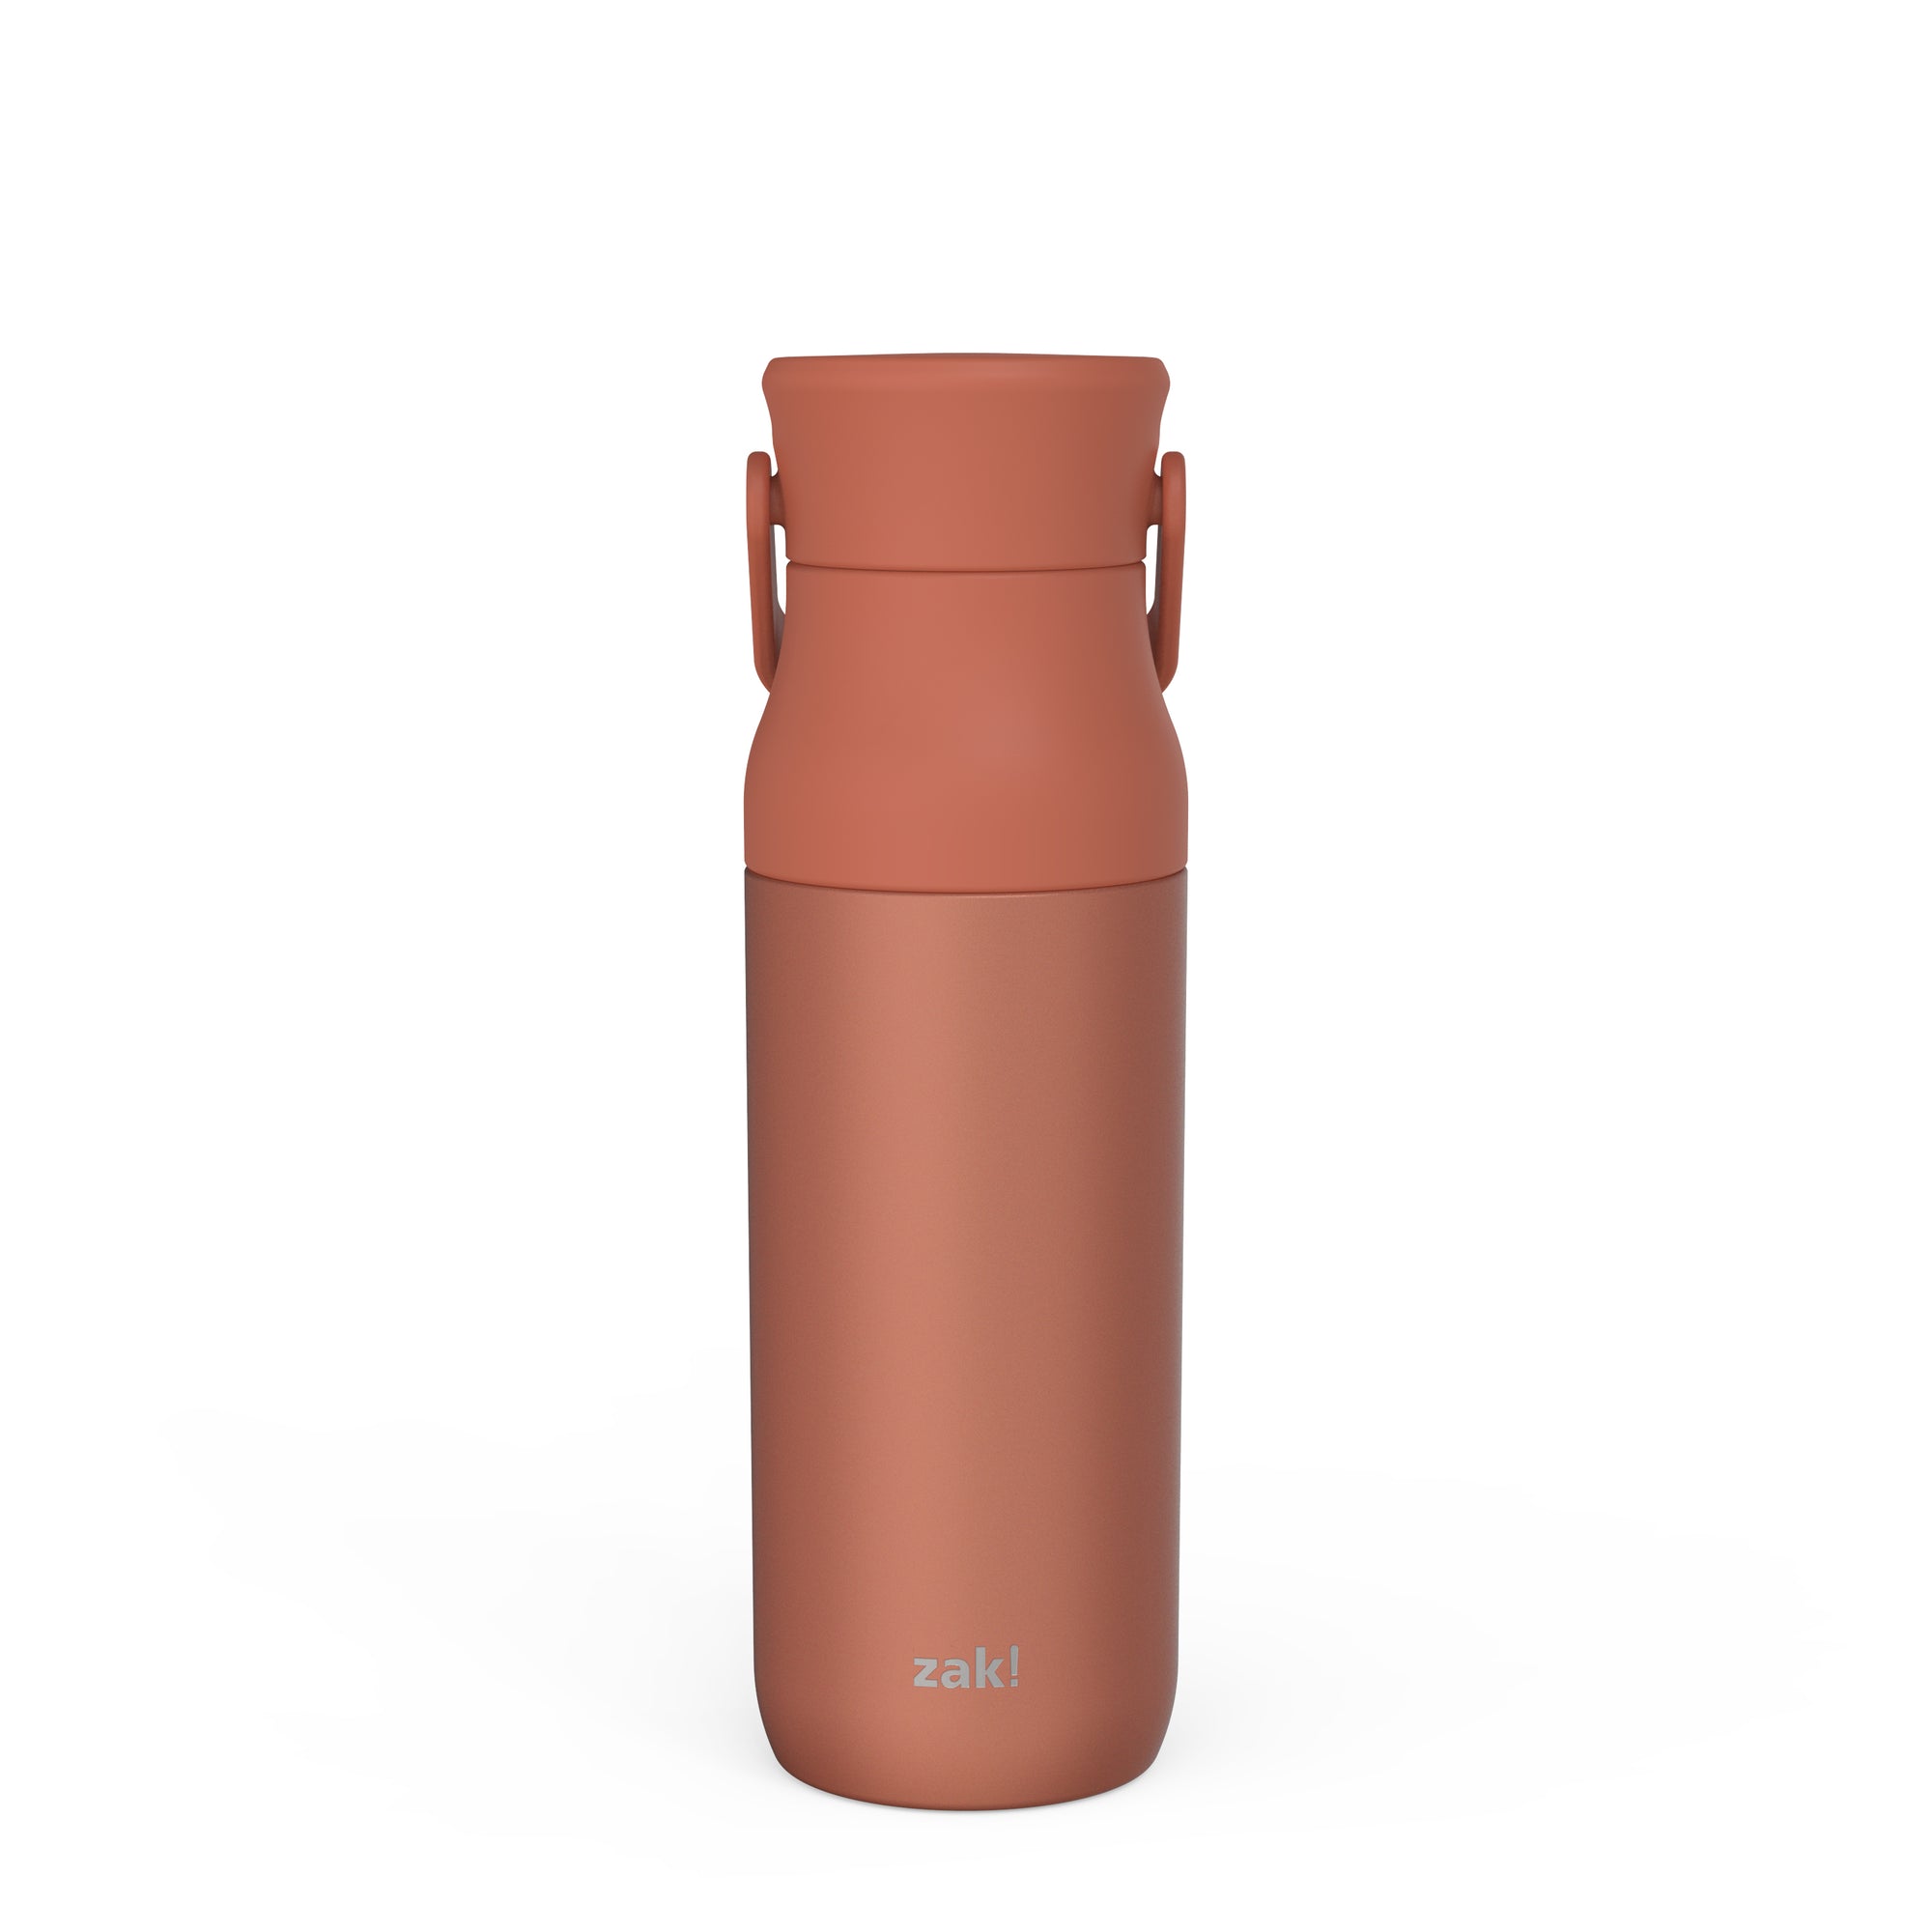 Harmony Recycled Stainless Steel Insulated Water Bottle with Large Chug Lid - Sienna, 32 ounces